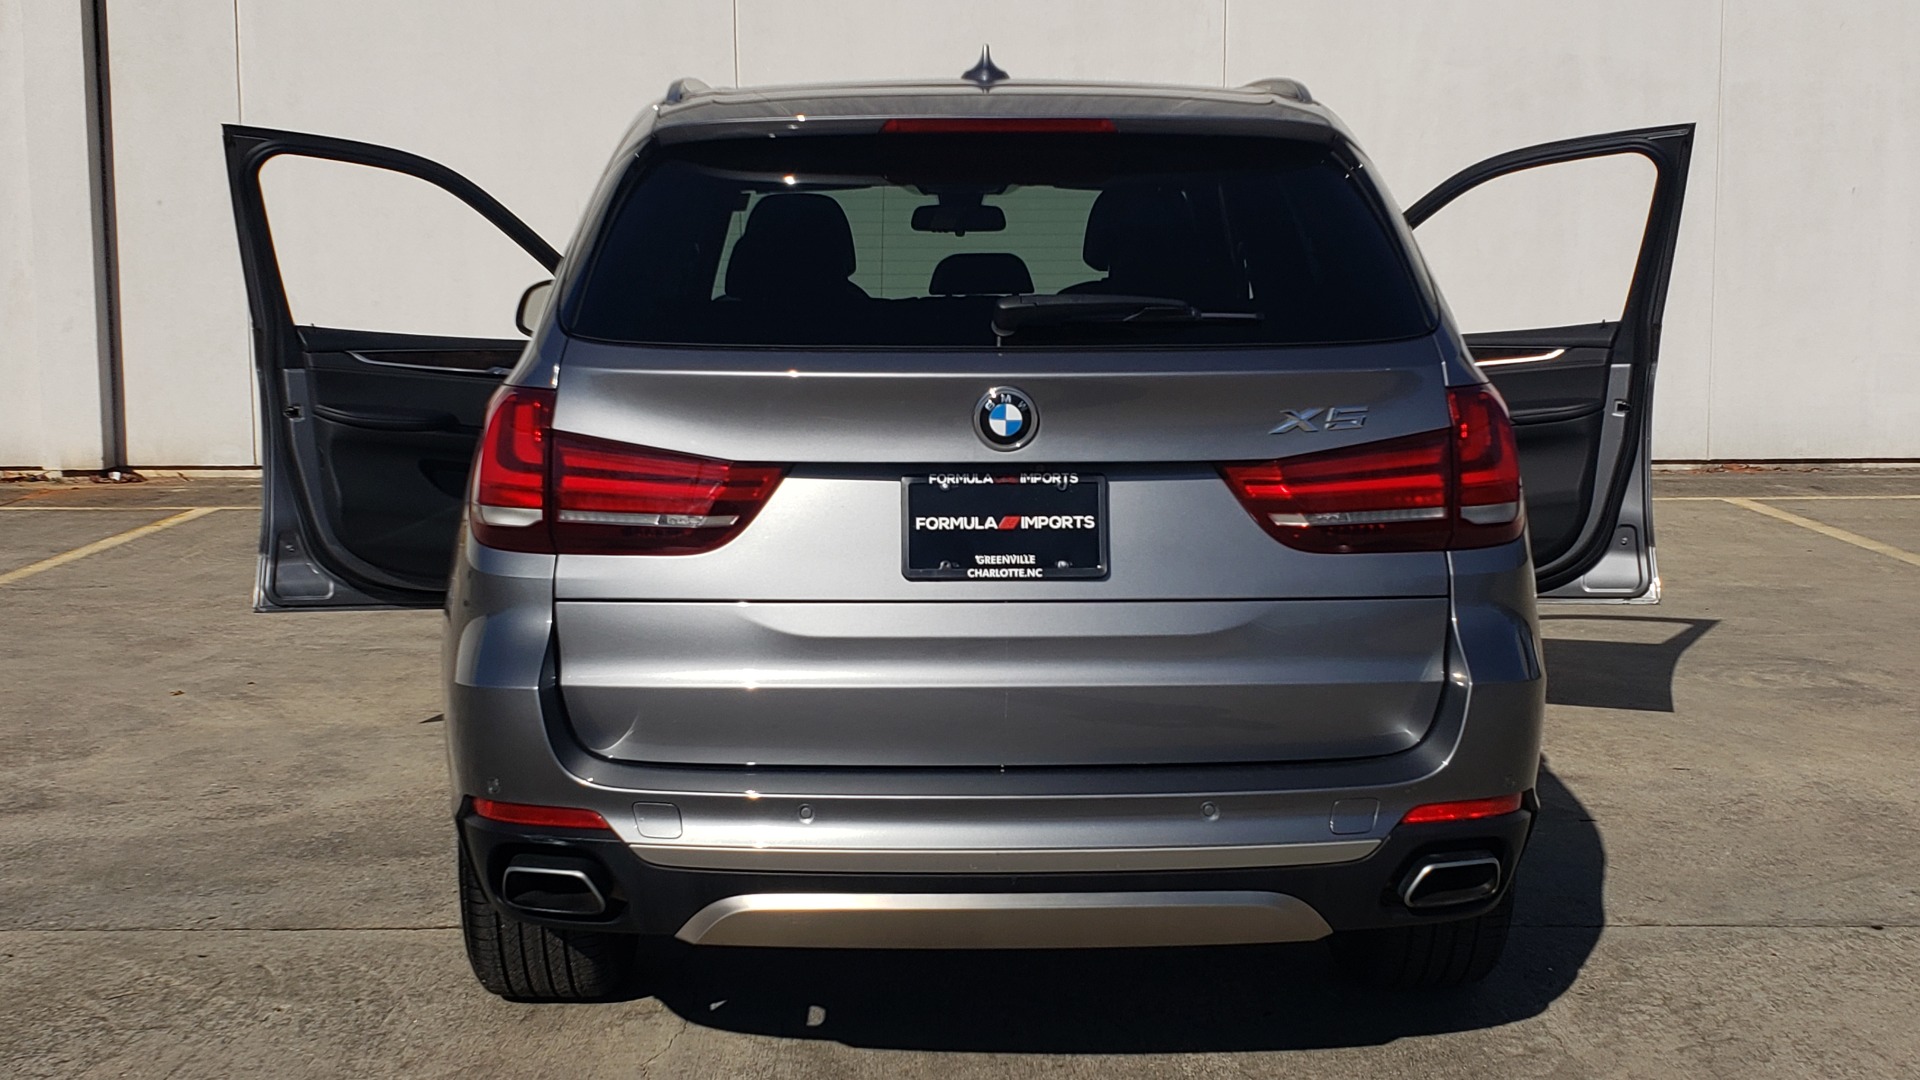 Used 2018 BMW X5 XDRIVE35I PREMIUM 3.0L SUV / DRVR ASST / NAV / HUD / SUNROOF / REARVIEW for sale $45,399 at Formula Imports in Charlotte NC 28227 29